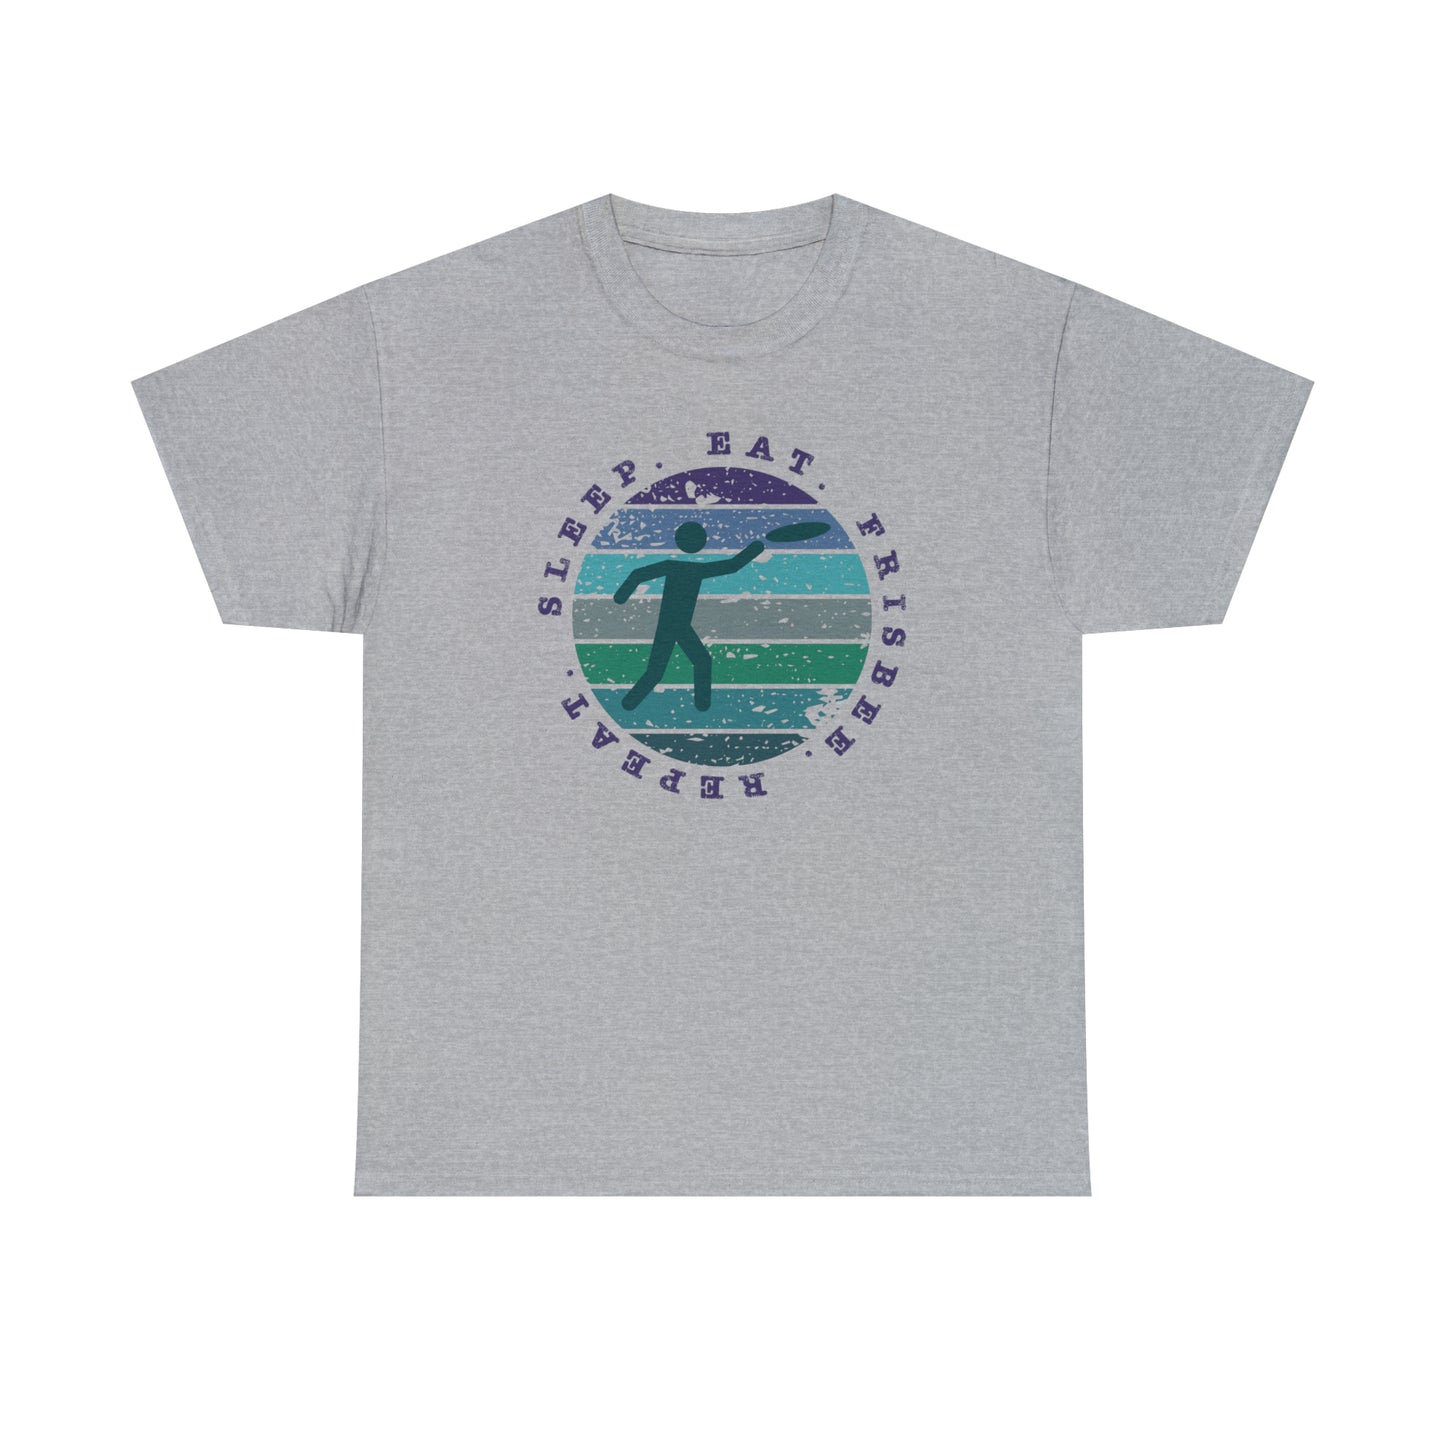 Frisbee T-Shirt For Frisbee Sport TShirt For Ultimate Frisbee T Shirt For Disc Golf Tee For Frisbee Player Gift